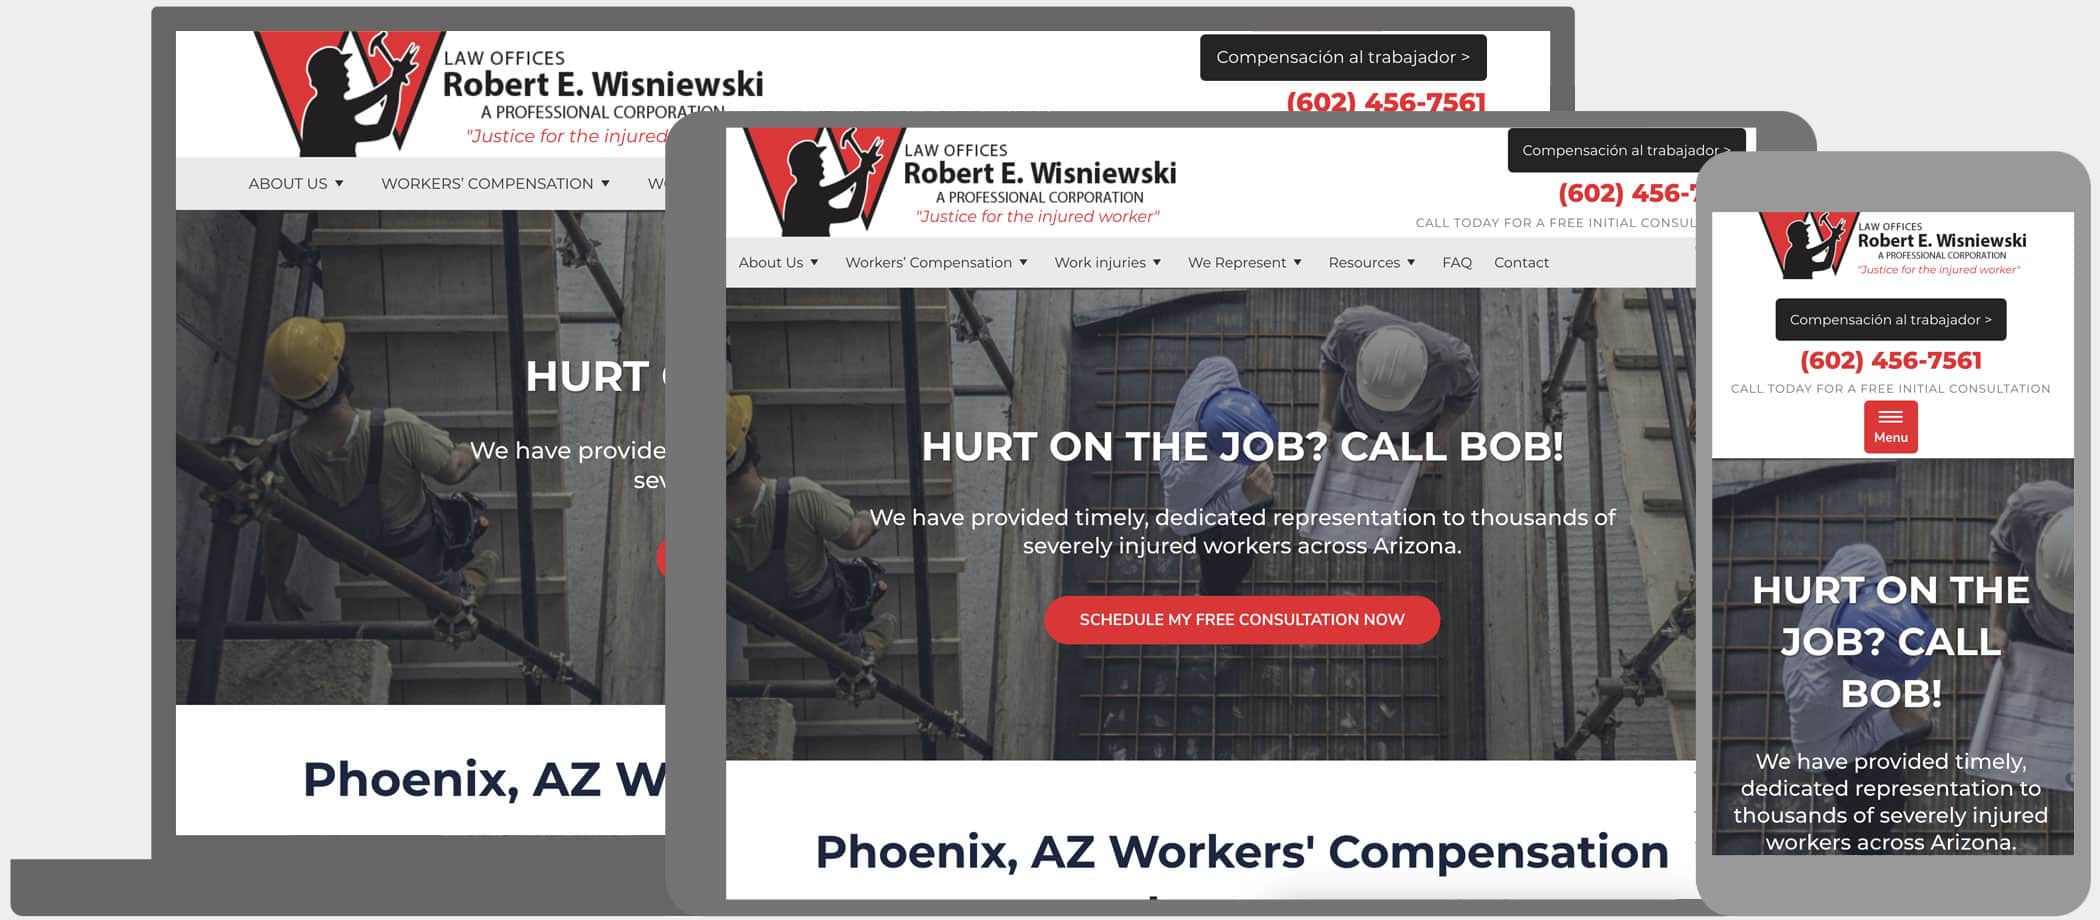 Law Offices of Robert E. Wisniewski: Work injury attorney web design: we improved conversions through better site structure and quality content.